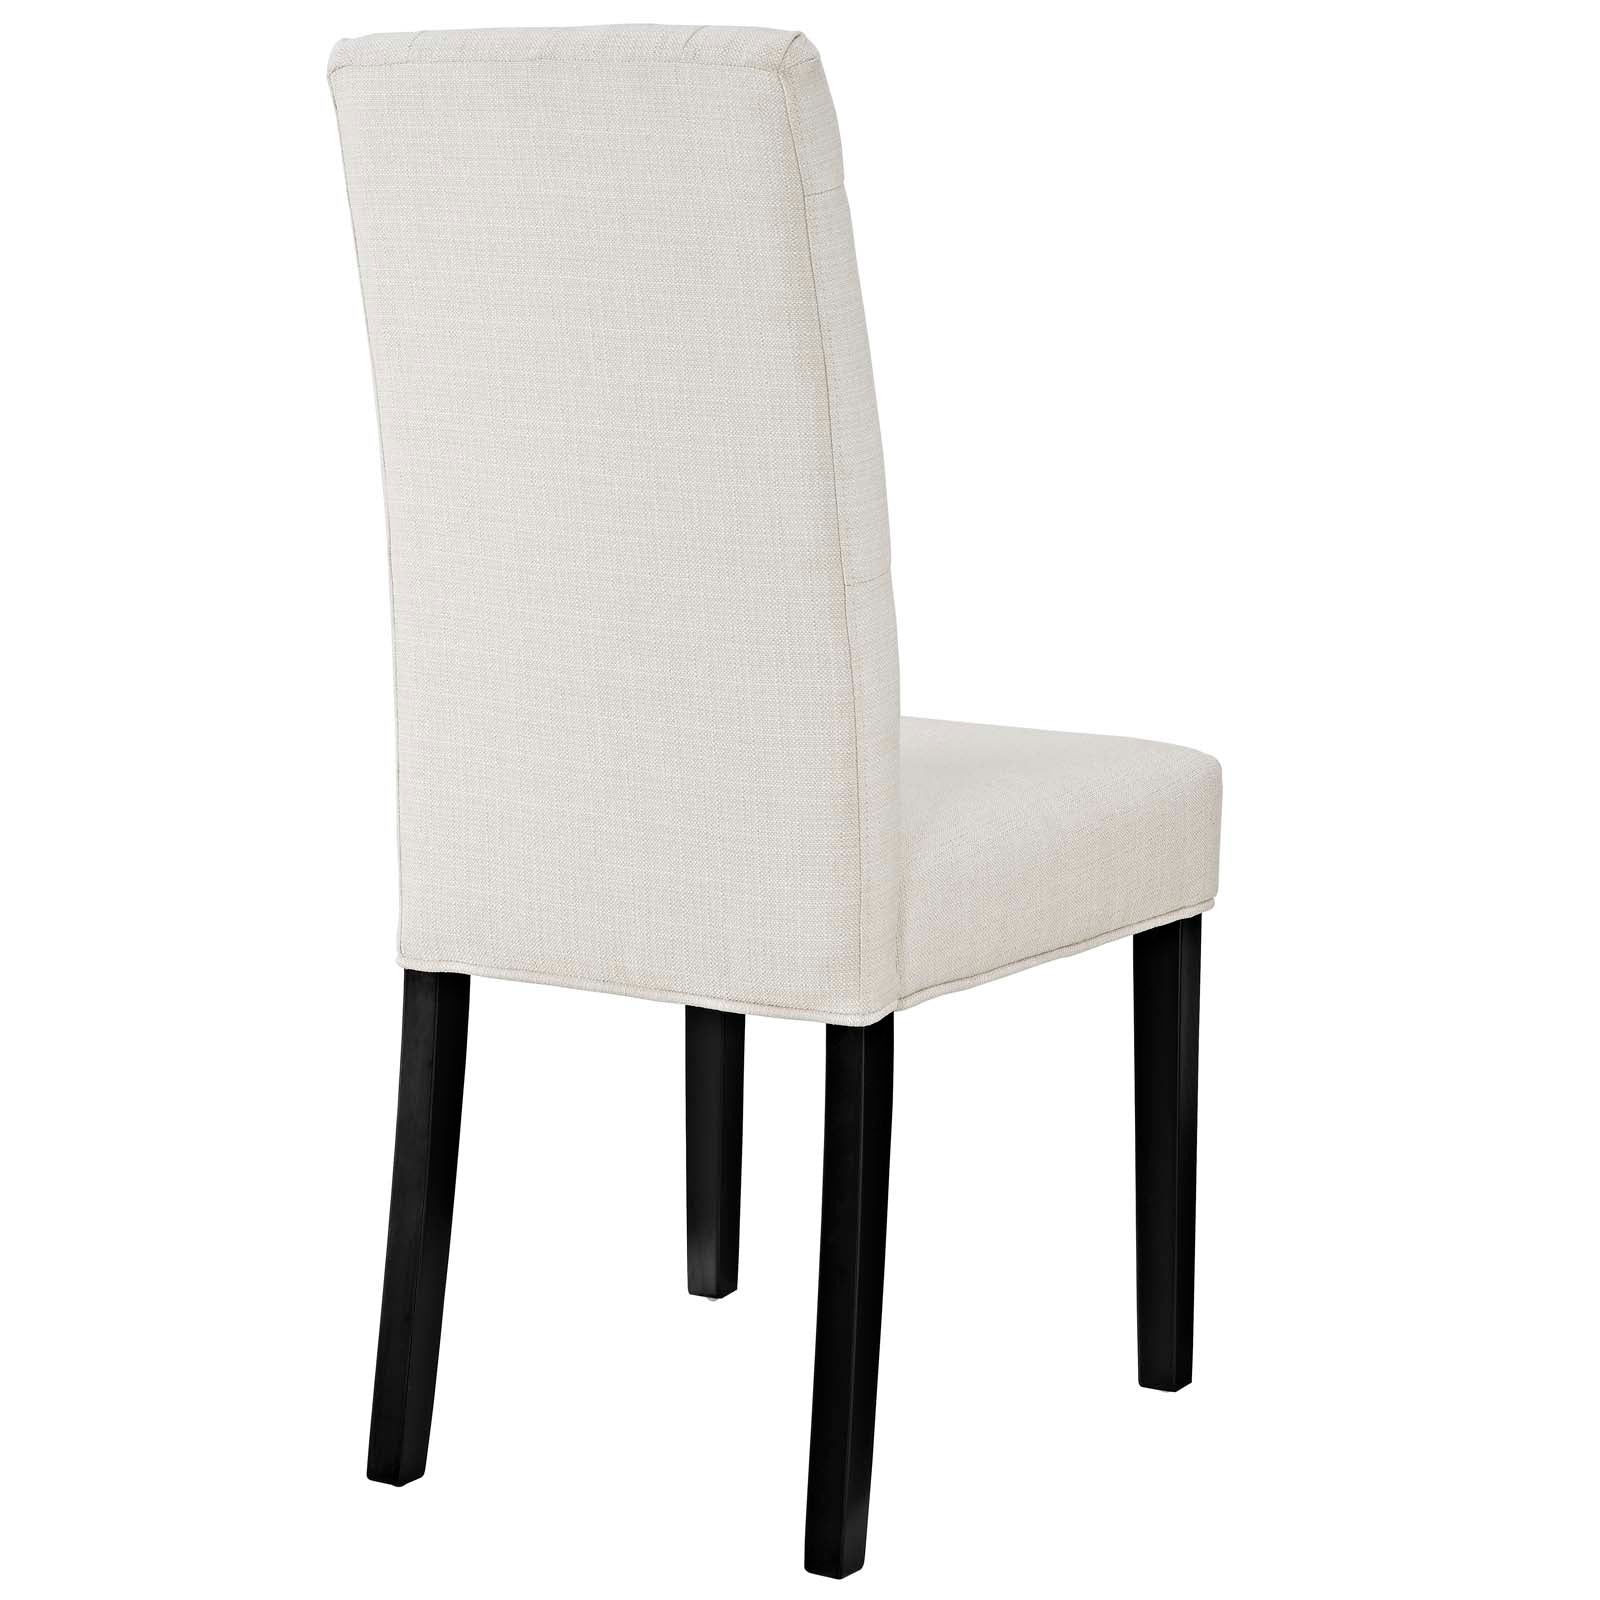 Confer Dining Side Chair Fabric Set of 2 - East Shore Modern Home Furnishings